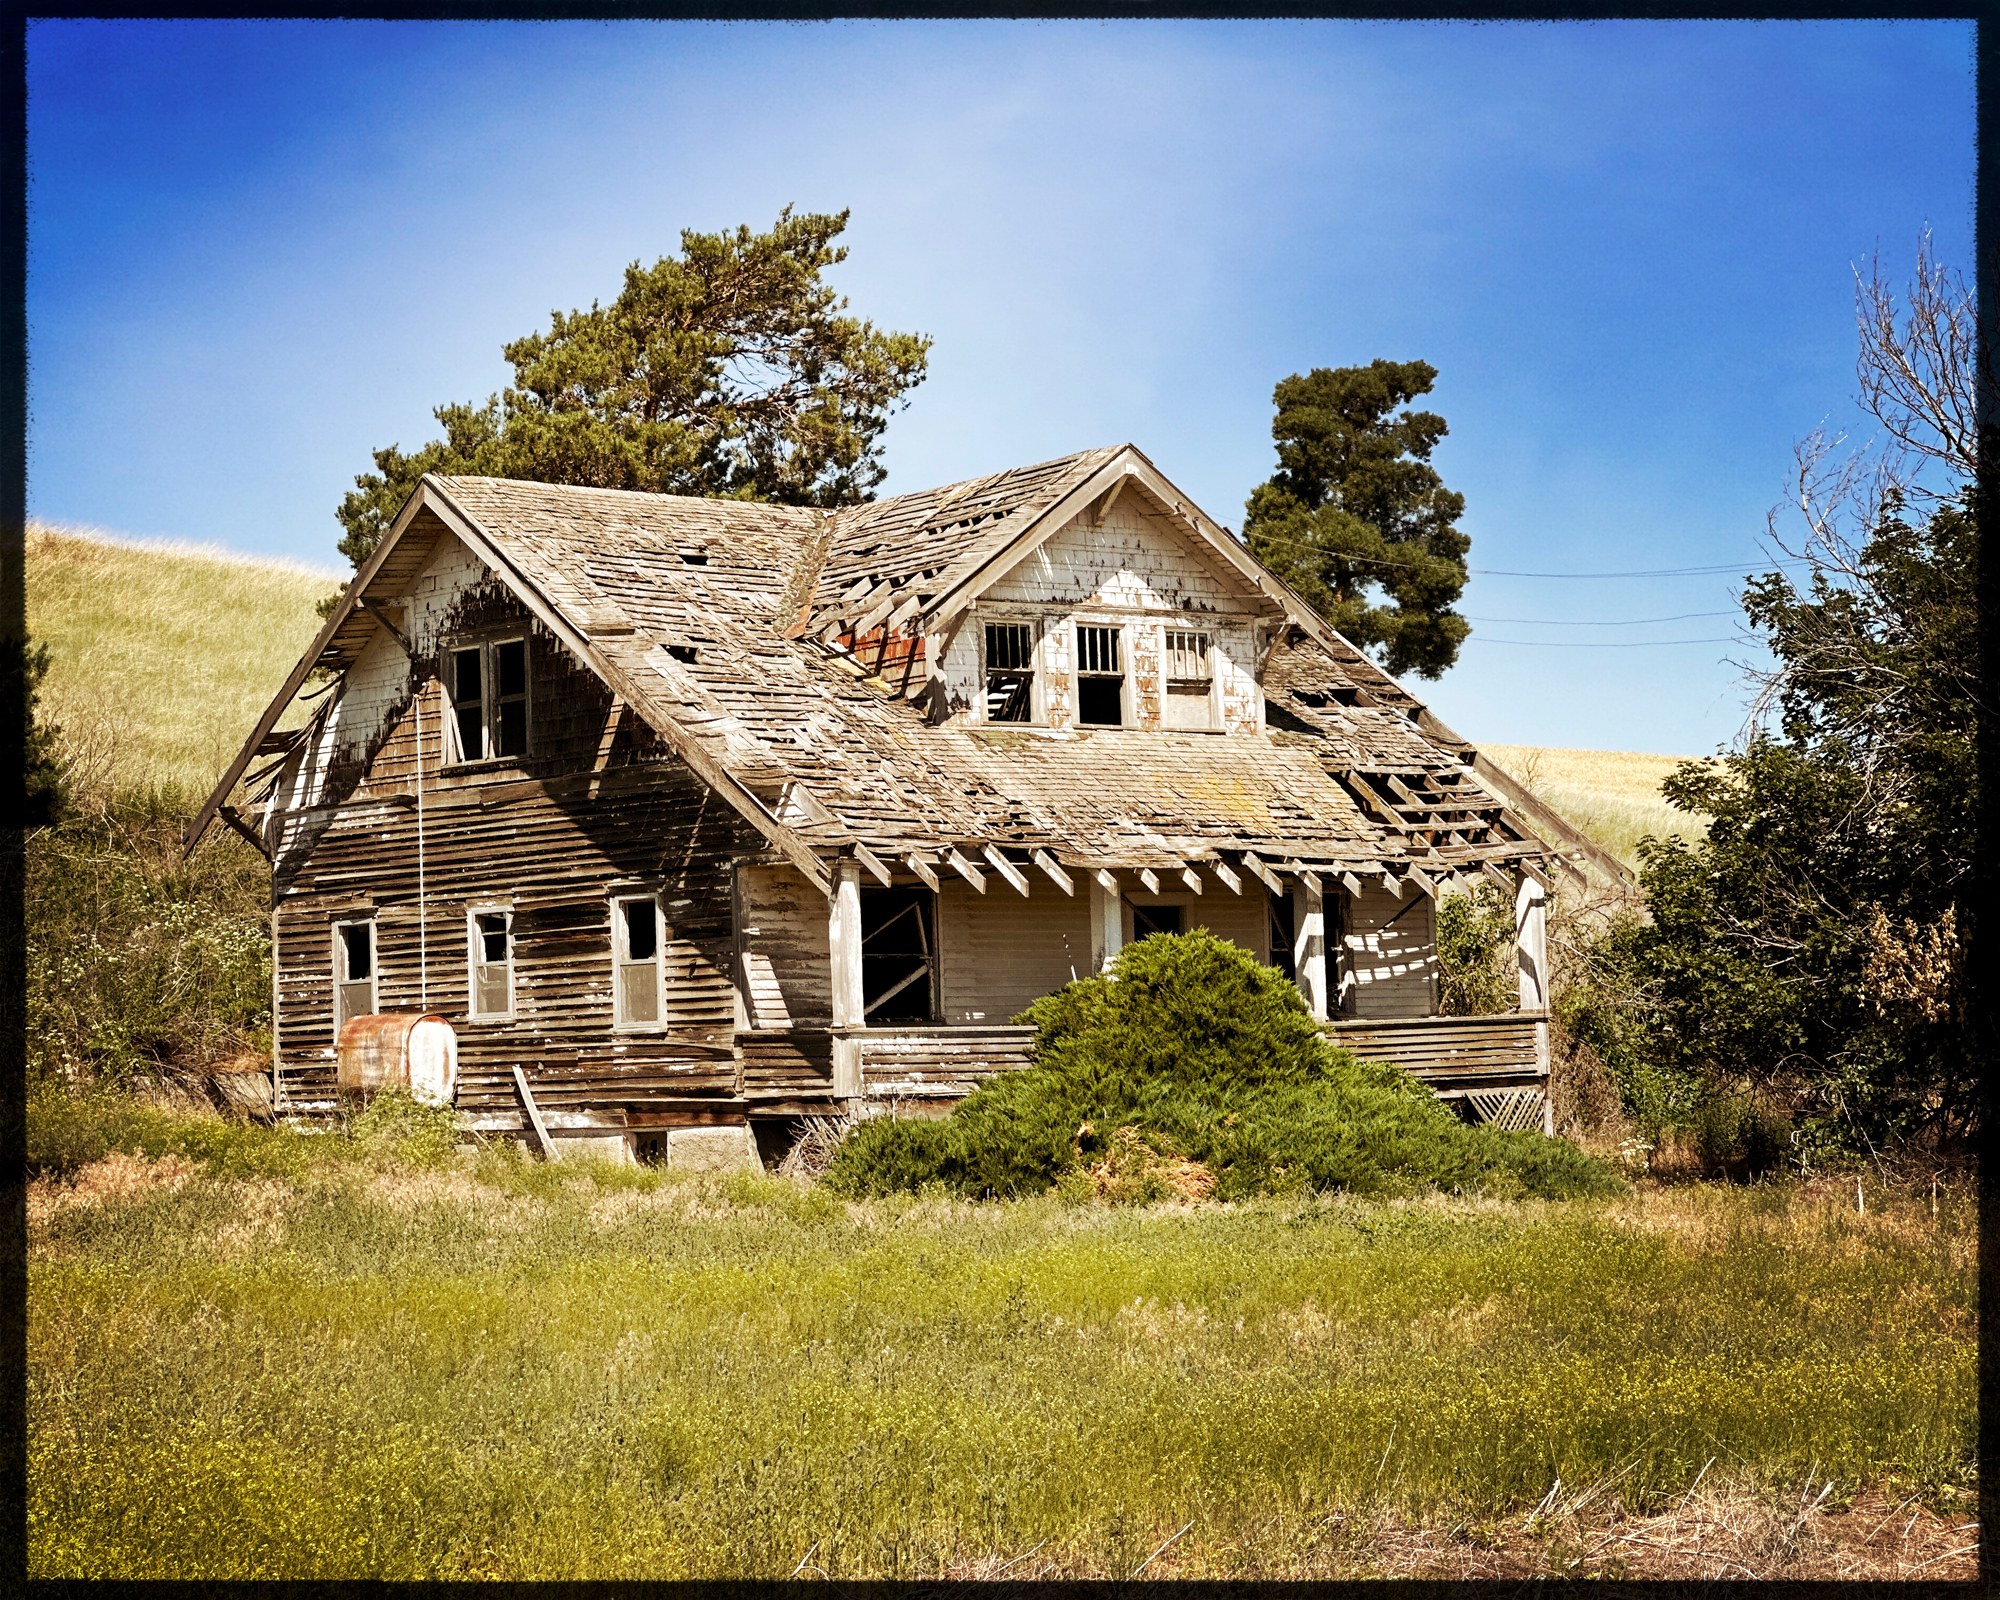 Another fixer upper that I have witnessed deteriorate over the years